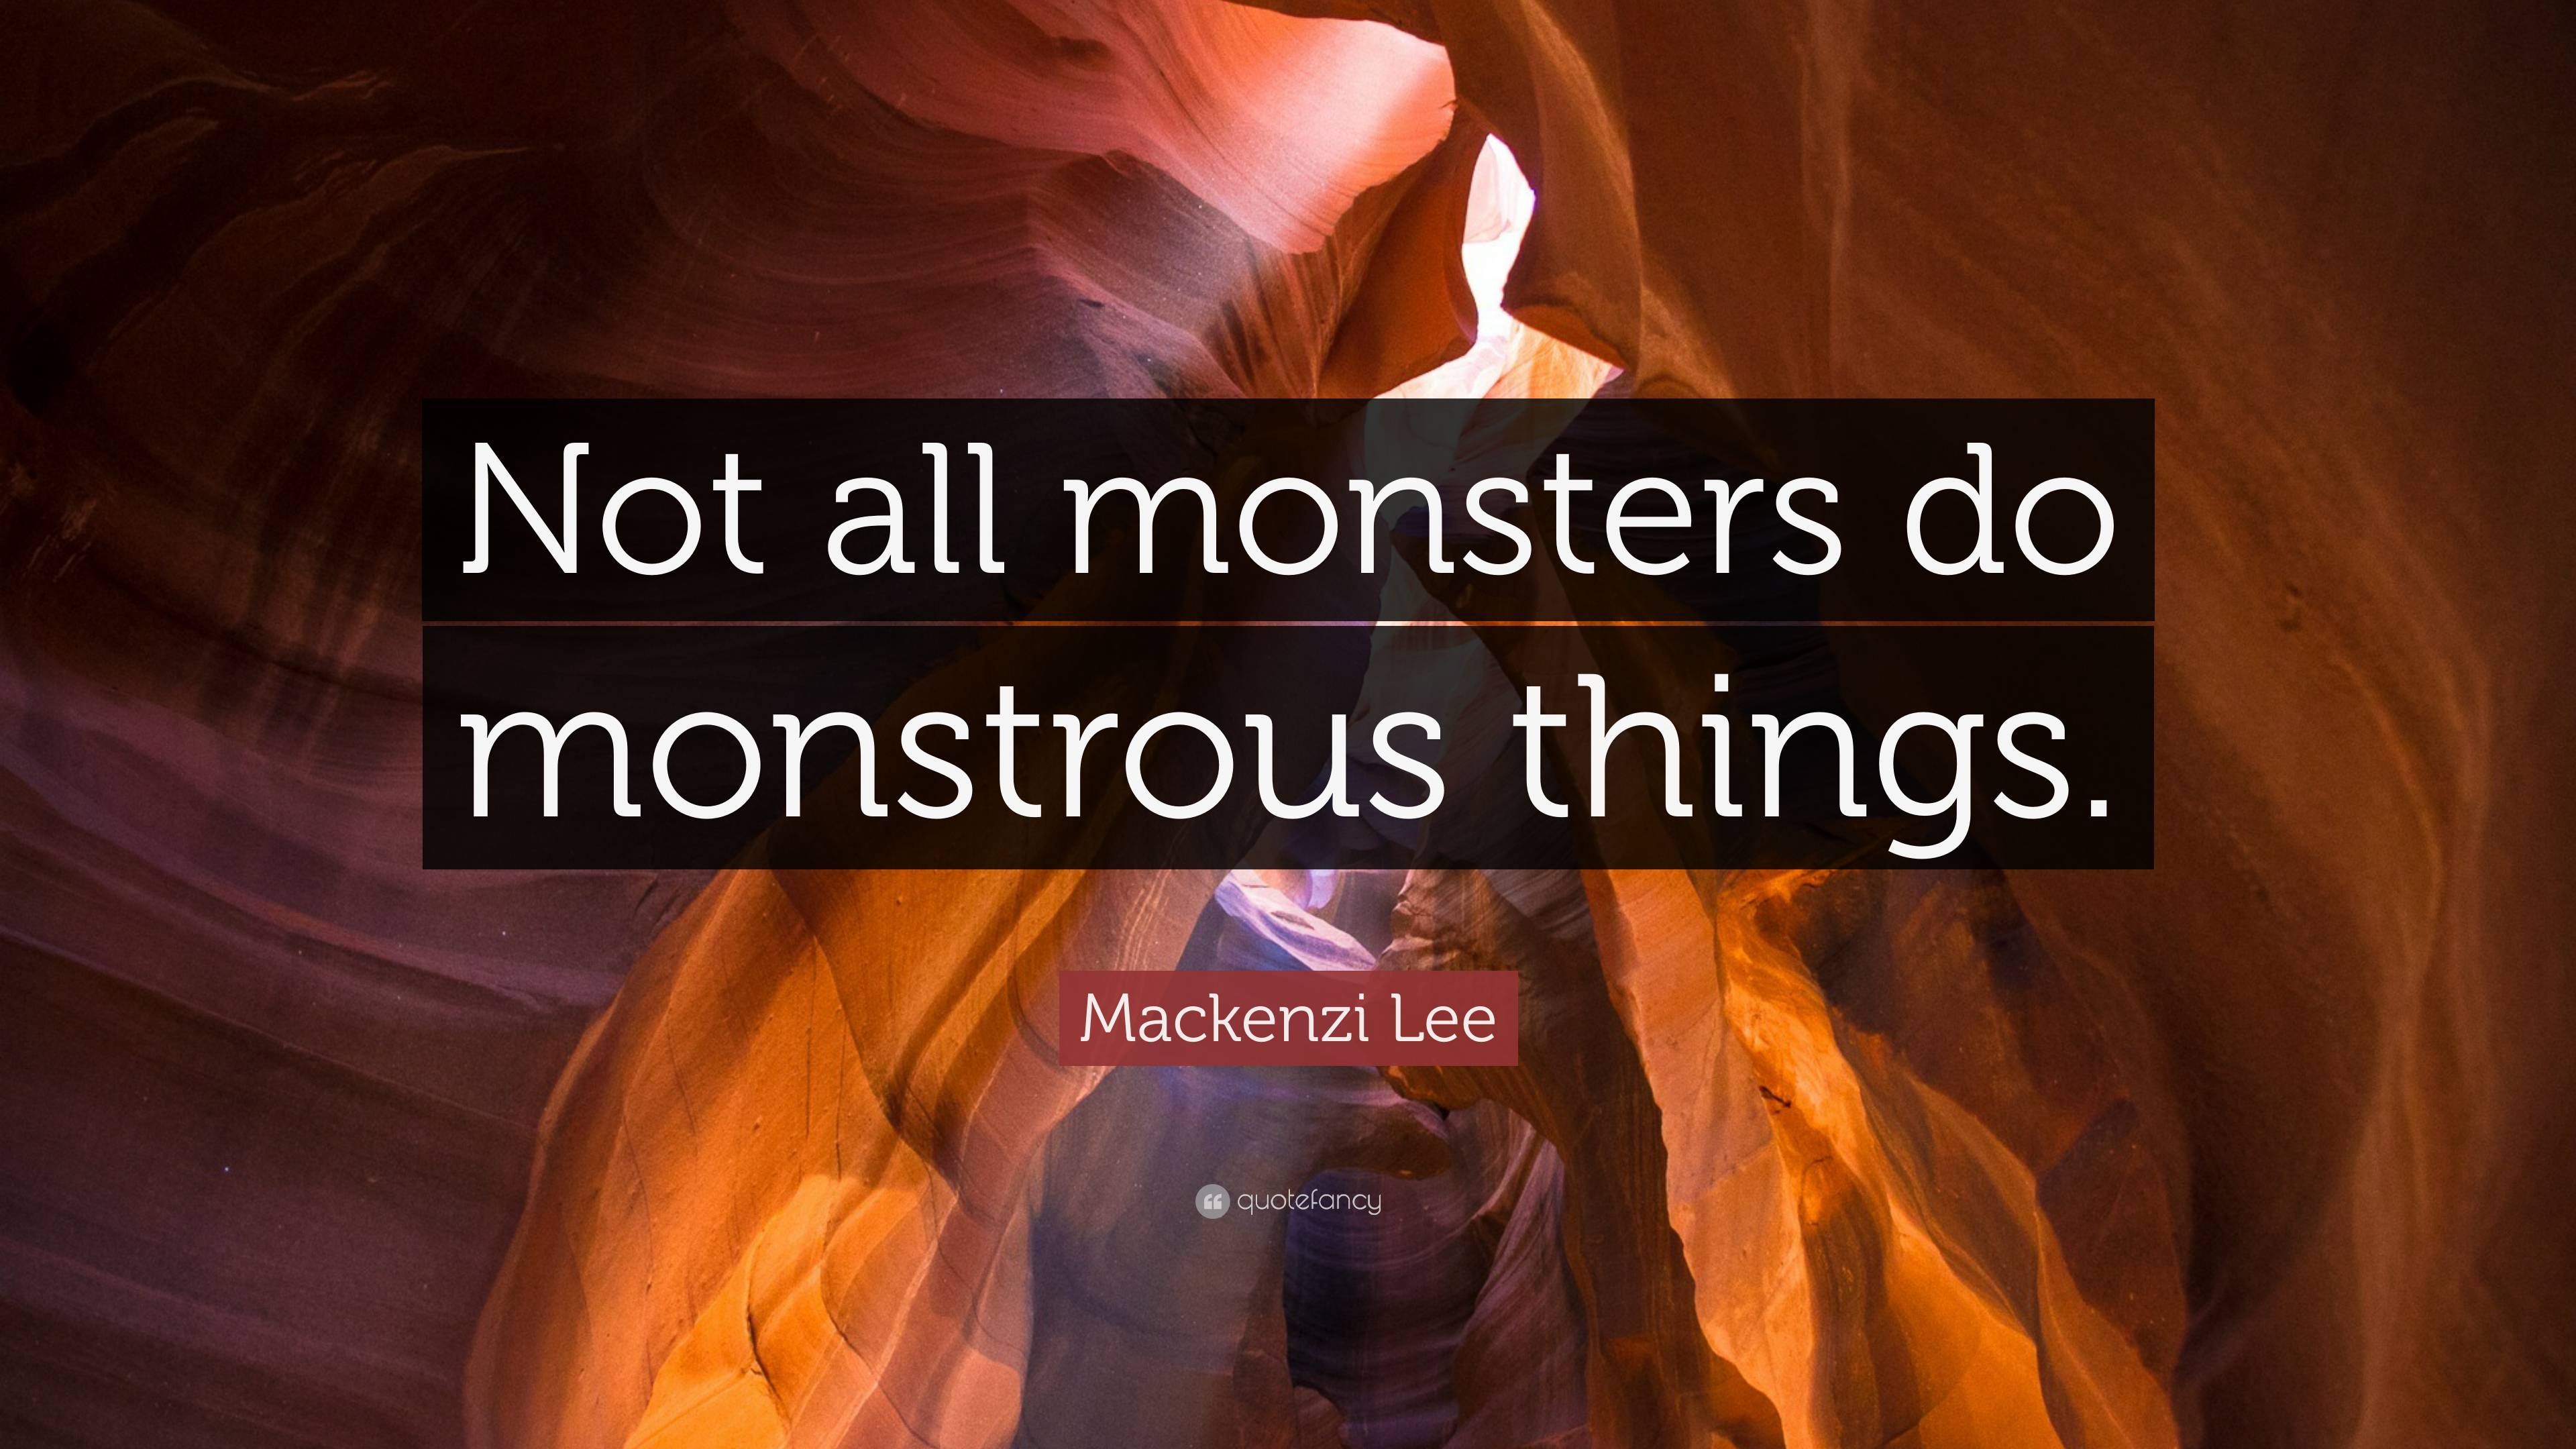 We're Not All Monsters